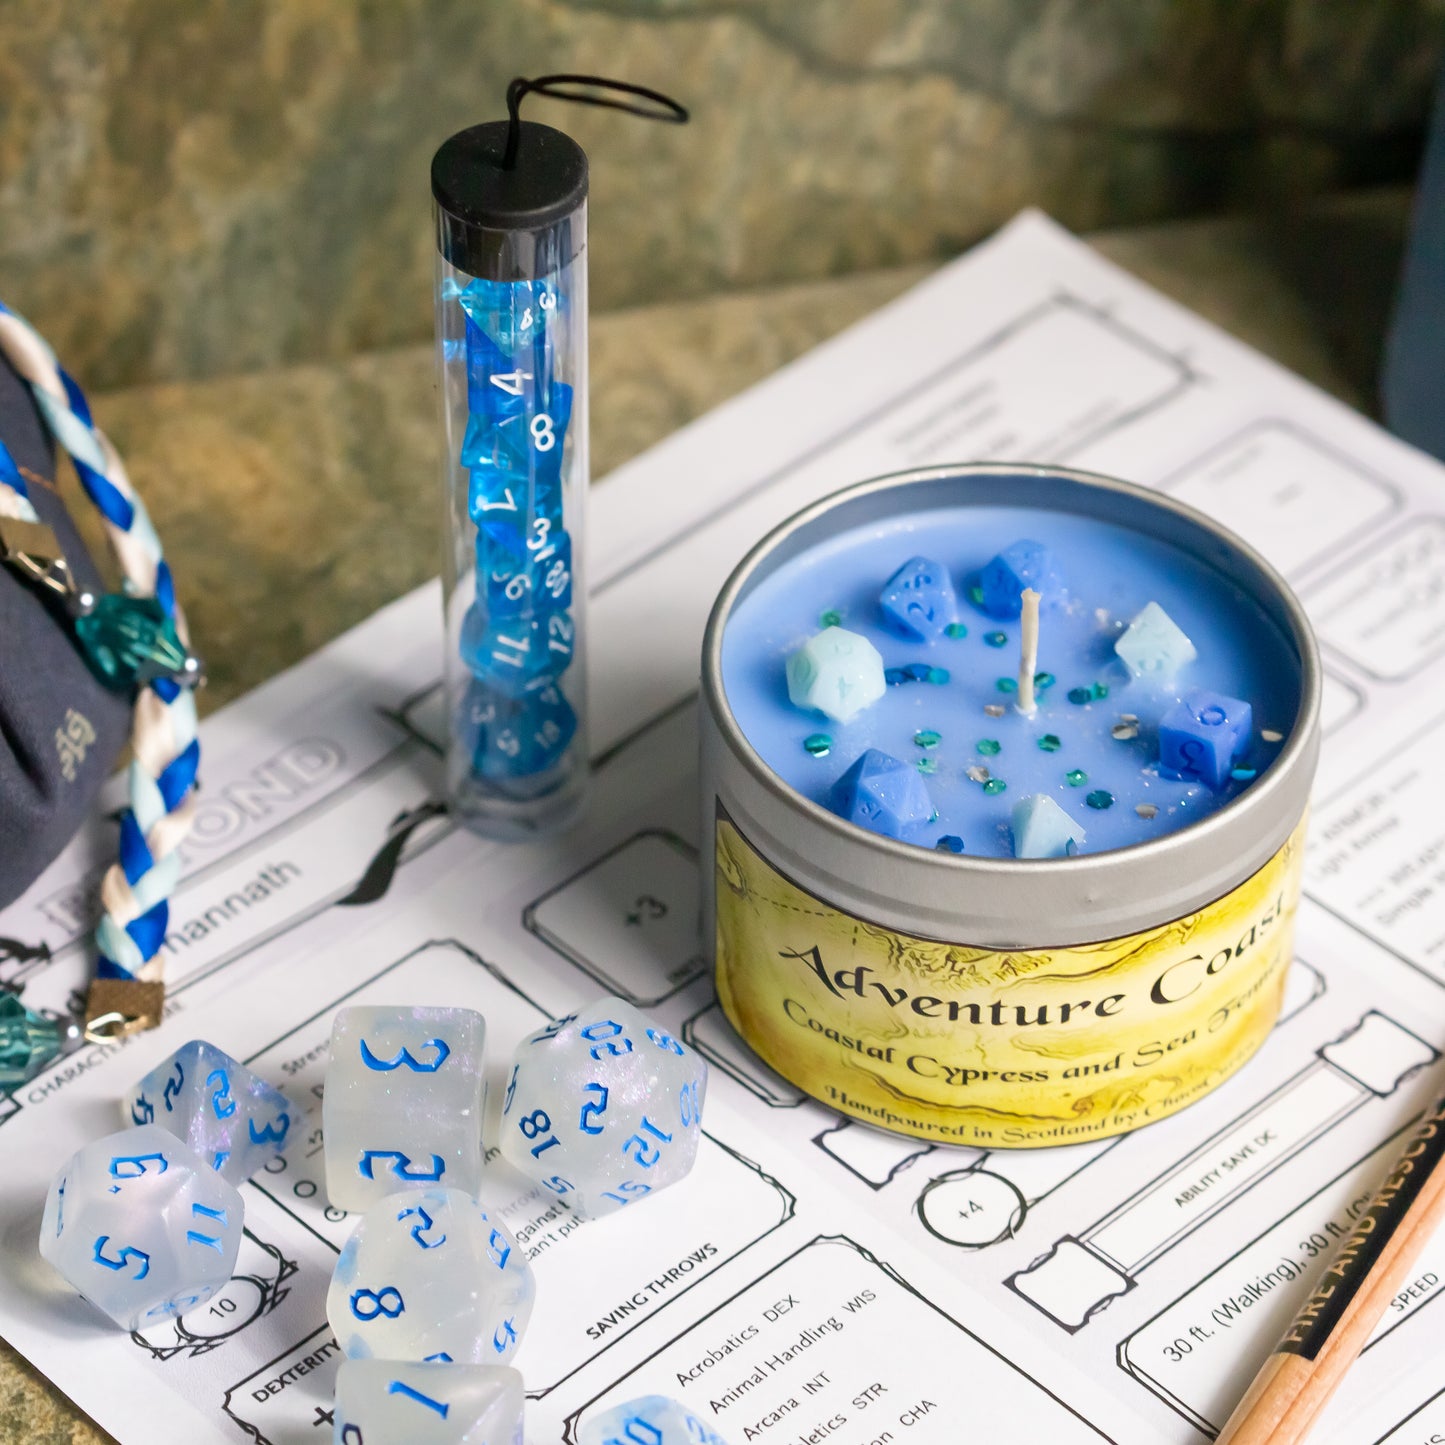 Adventure Coast, DnD Dice Candle, Wood Wick, Coastal Scented, Roleplay Candle, Dice Wax Melts, 35+ Hours